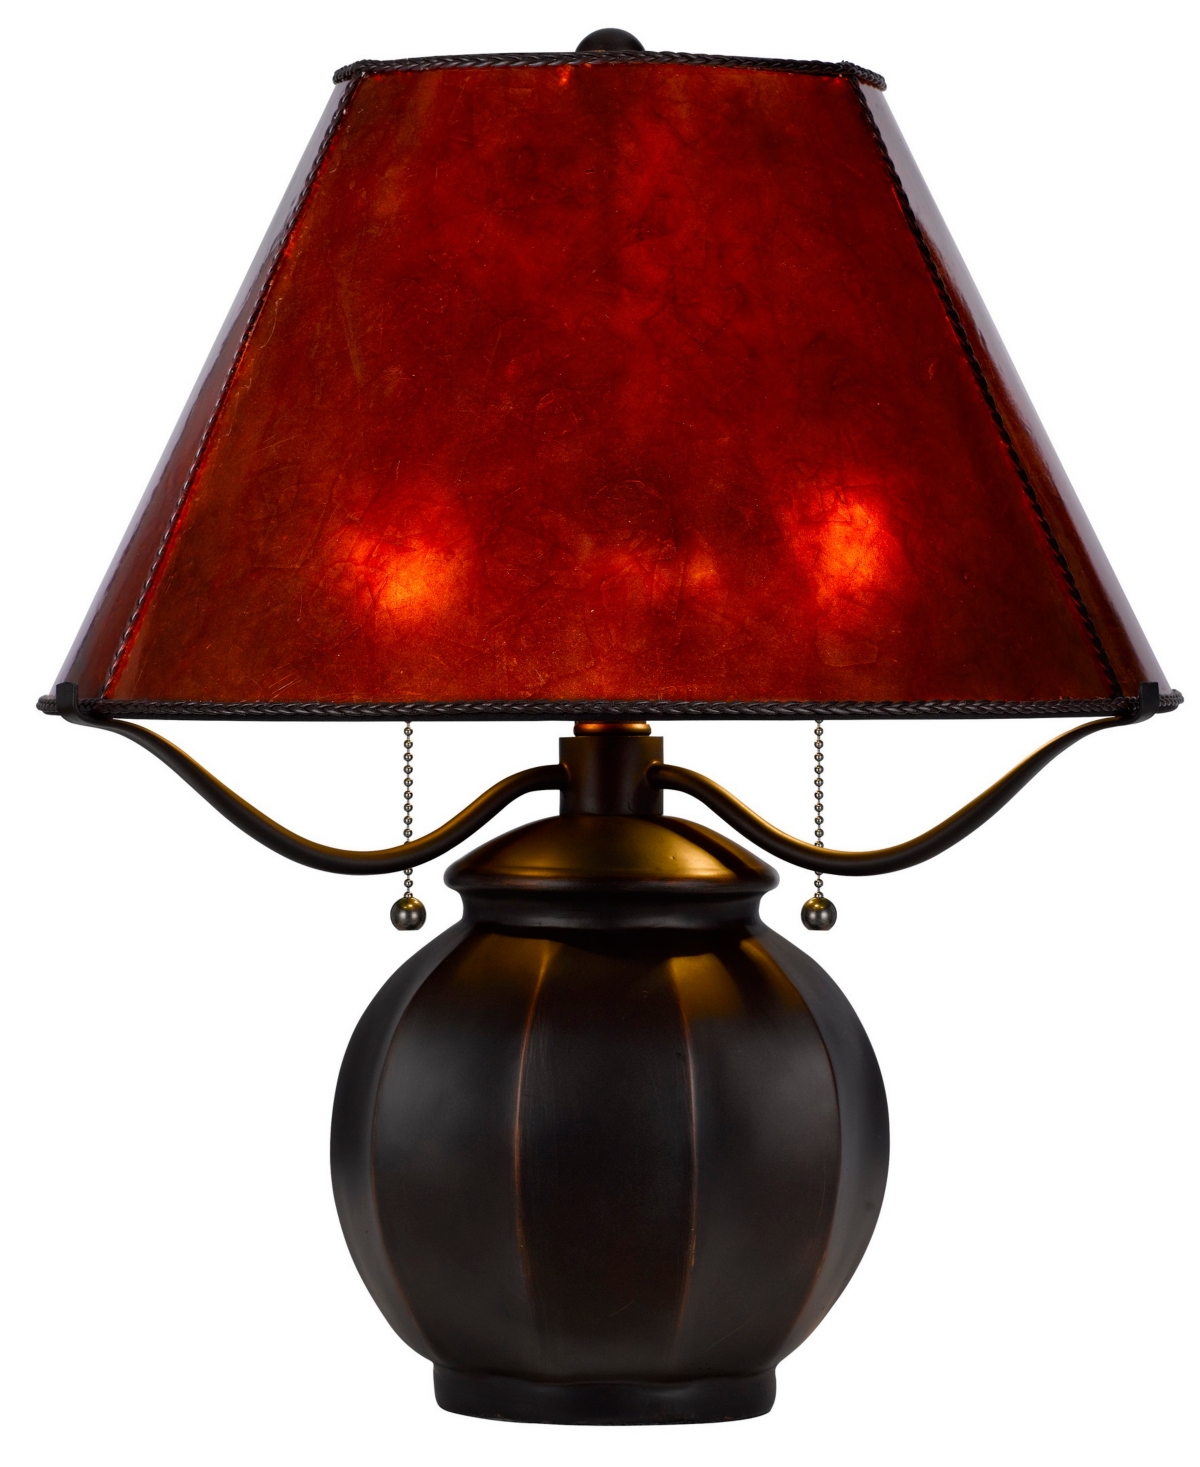 Cal Lighting 19.5" Height Metal And Resin Table Lamp In Mica